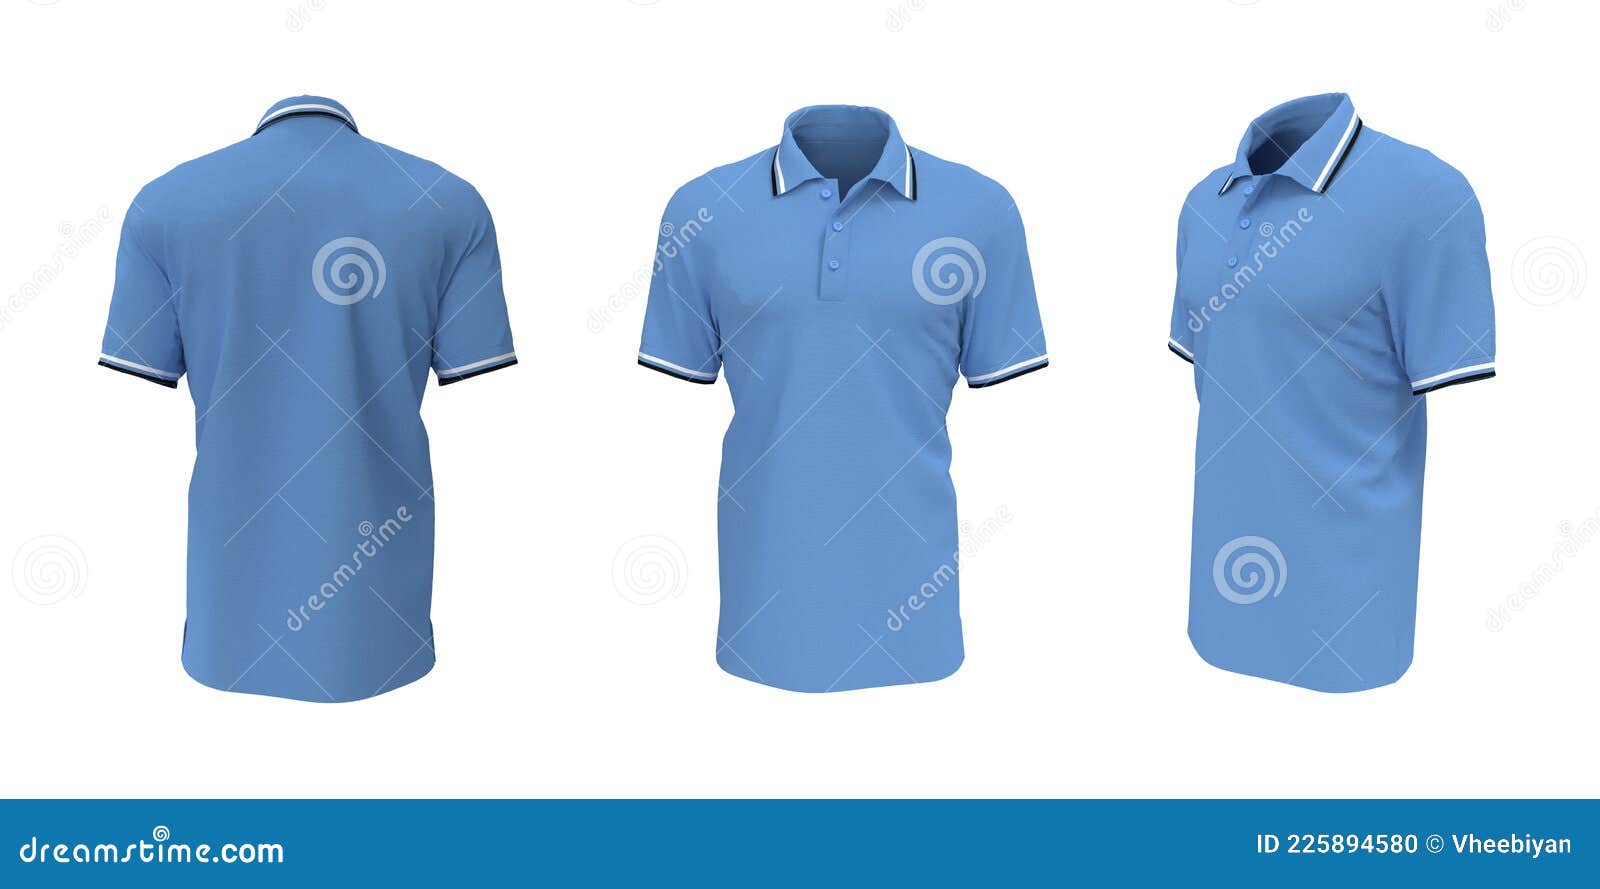 Blank Collared Shirt Mockup, Front, Side and Back Views Stock ...